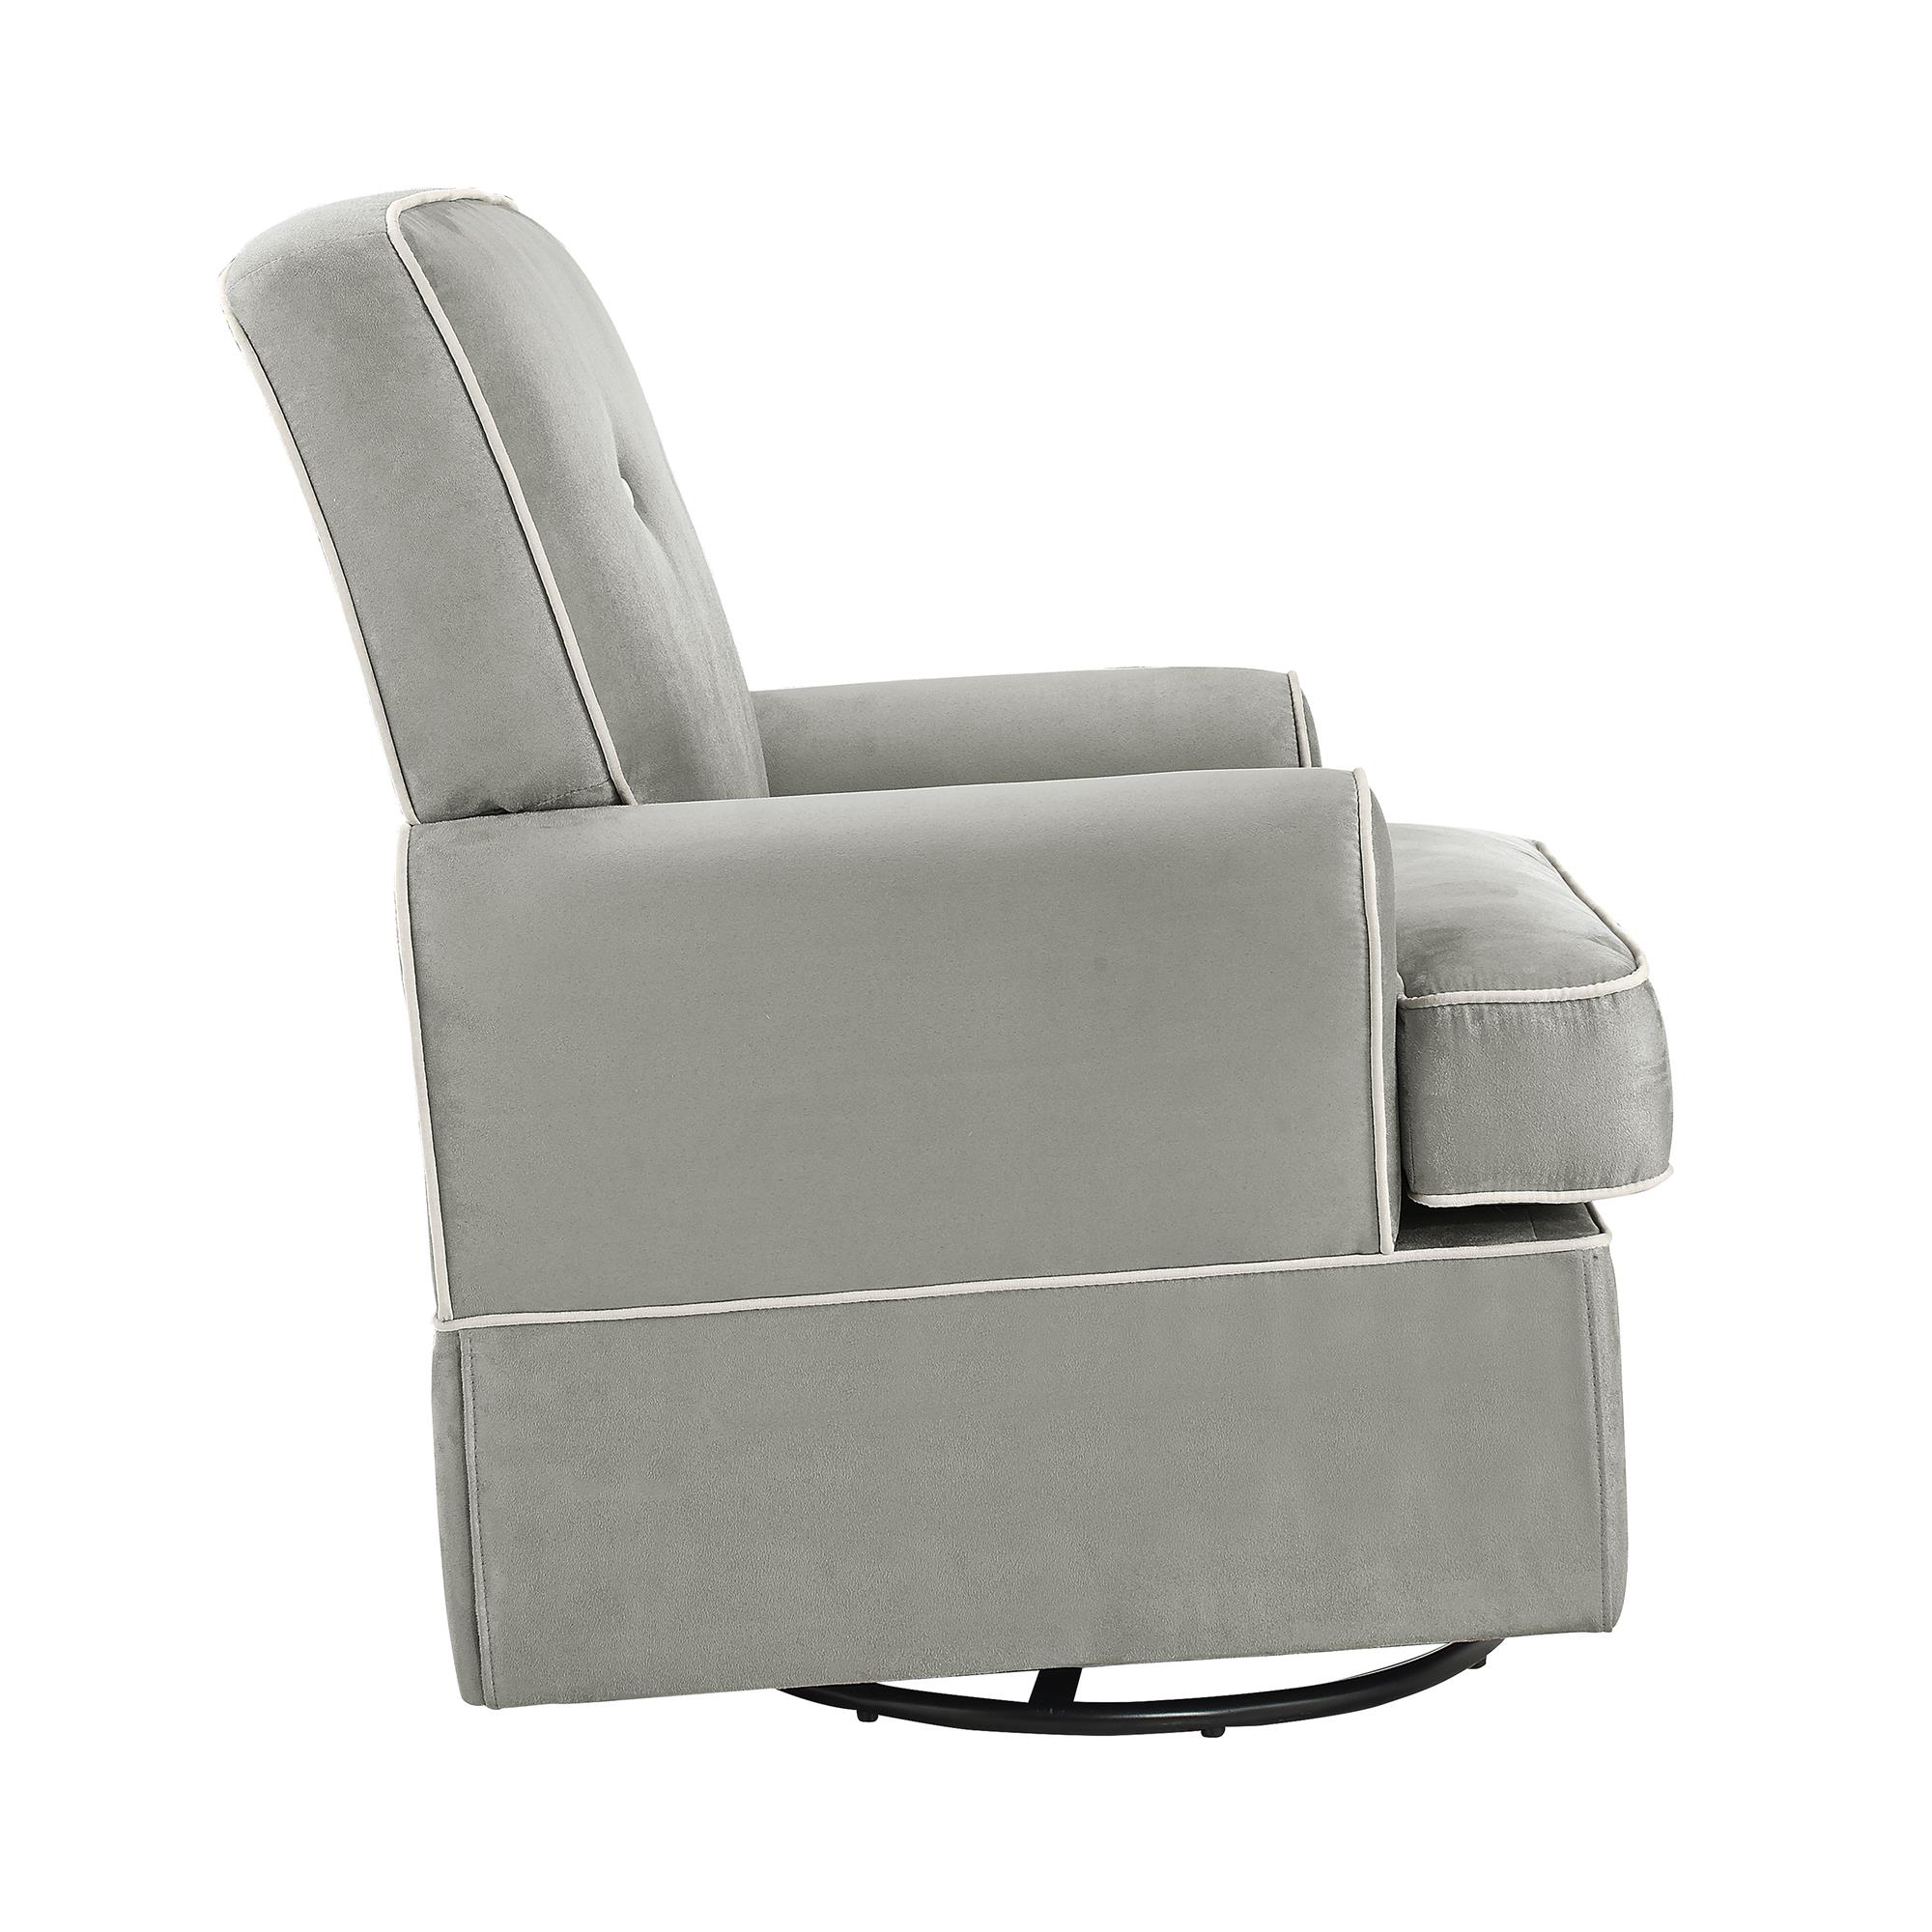 Baby Relax Tinsley Swivel Glider Gray - image 4 of 8